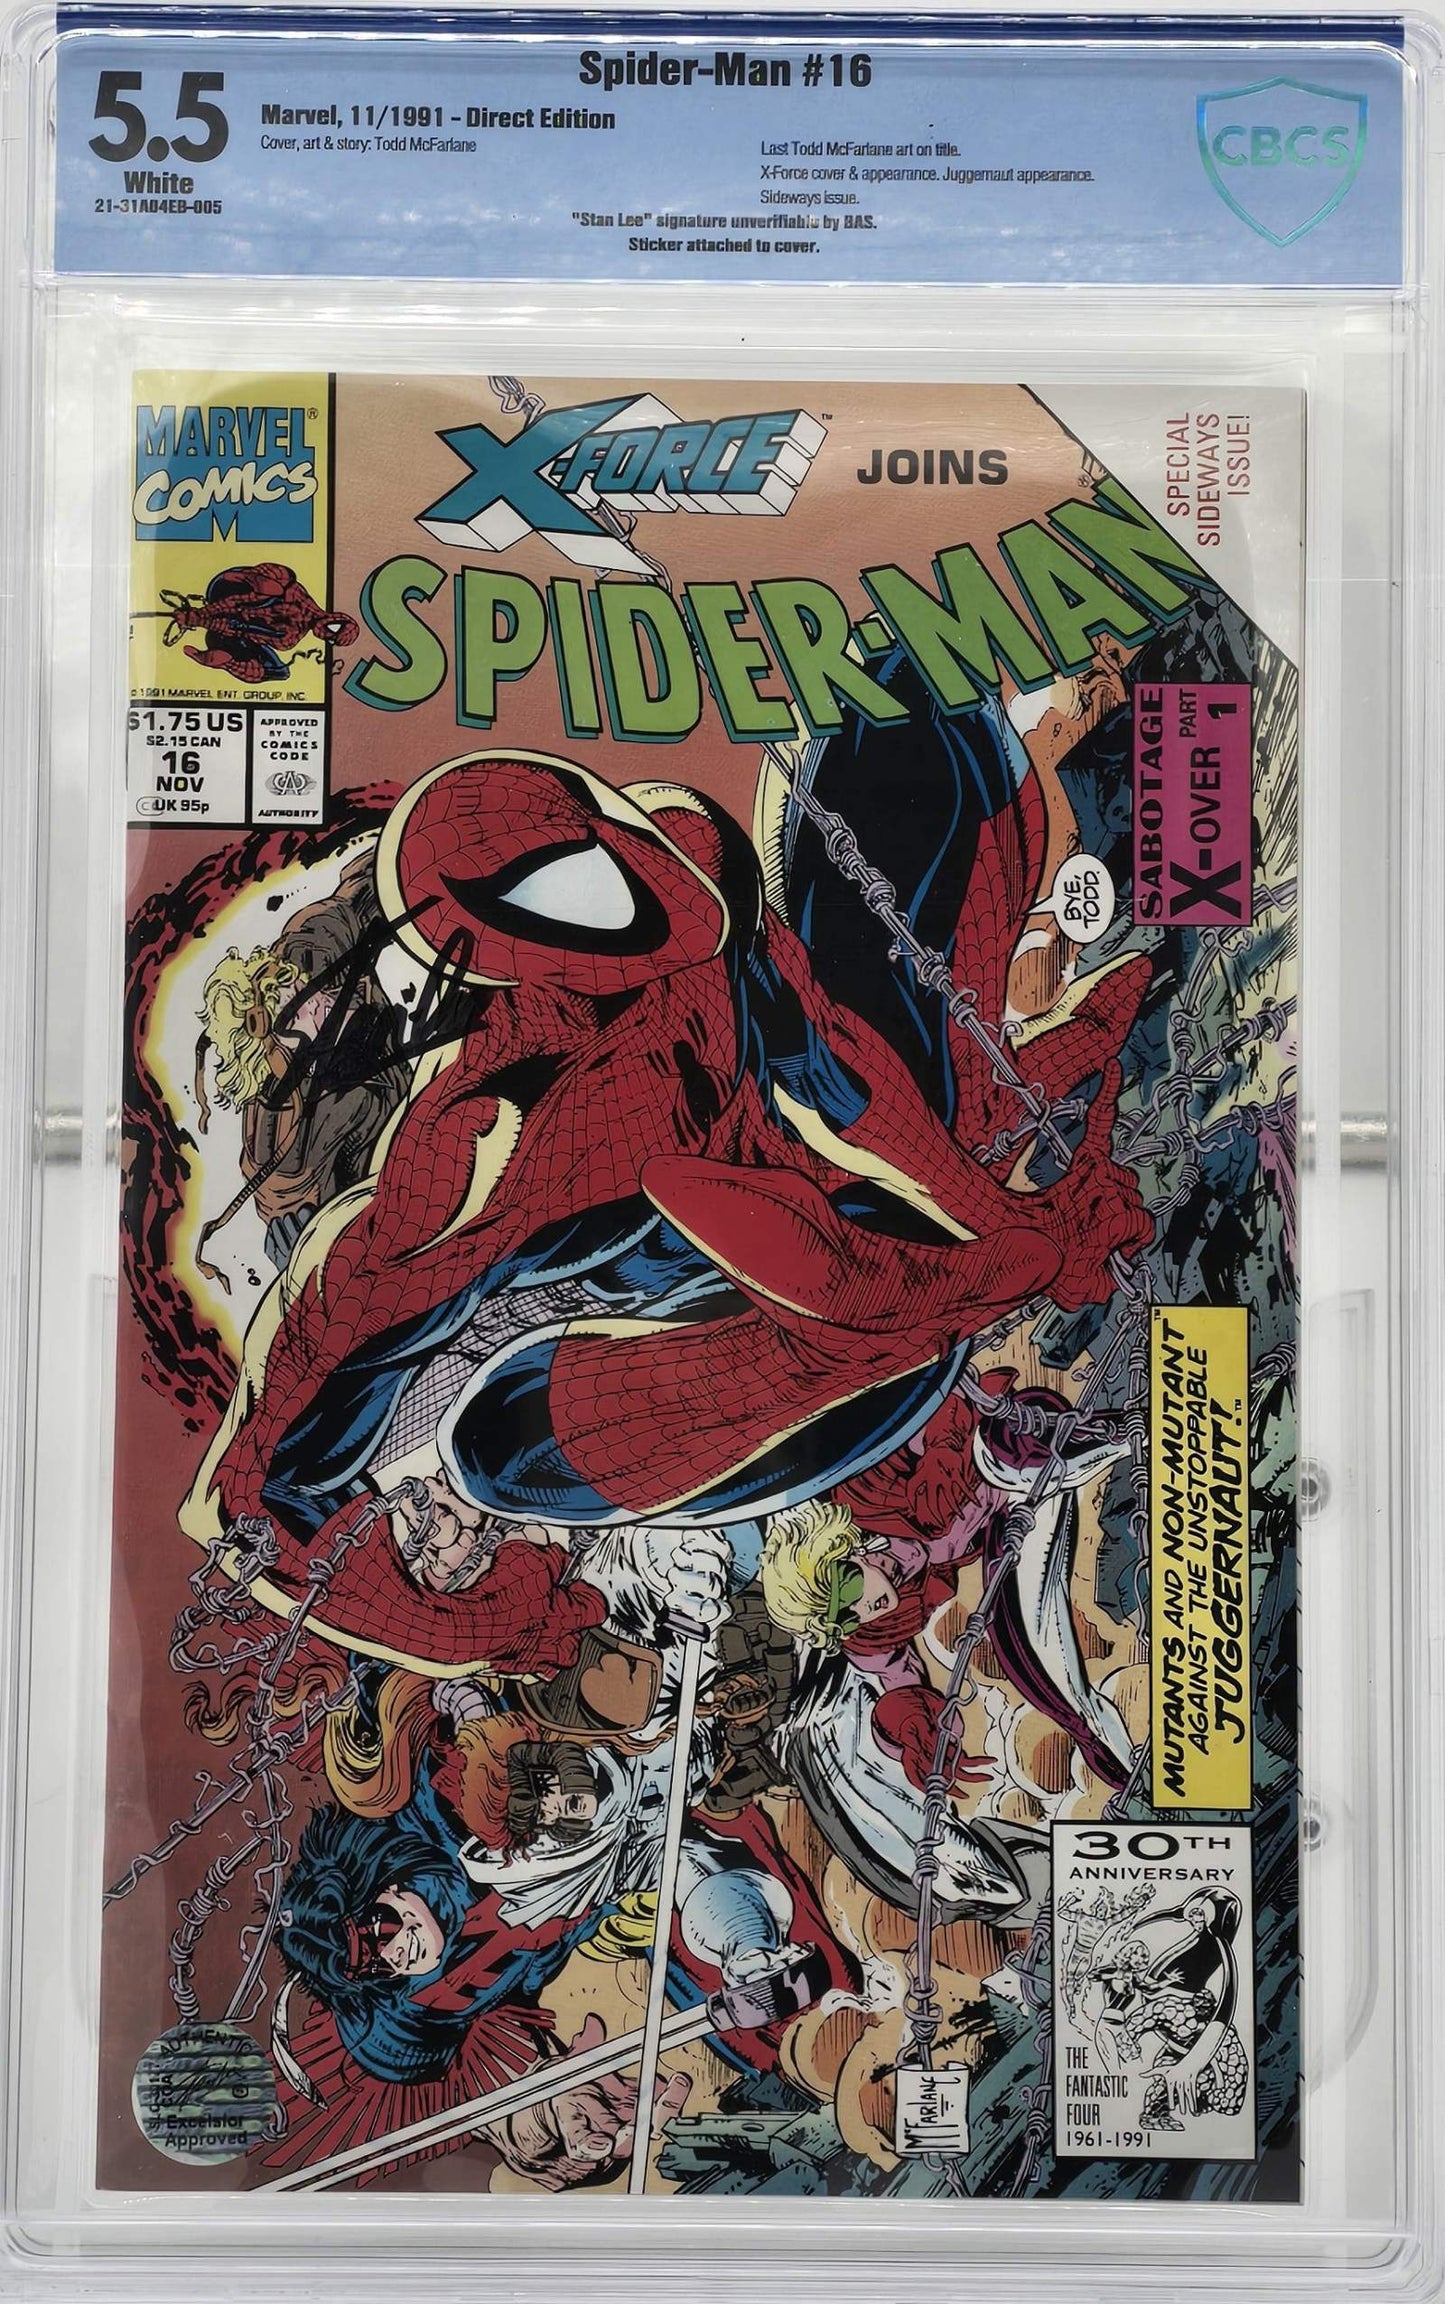 Spider-Man #16 CBCS 5.5 - Direct Edition